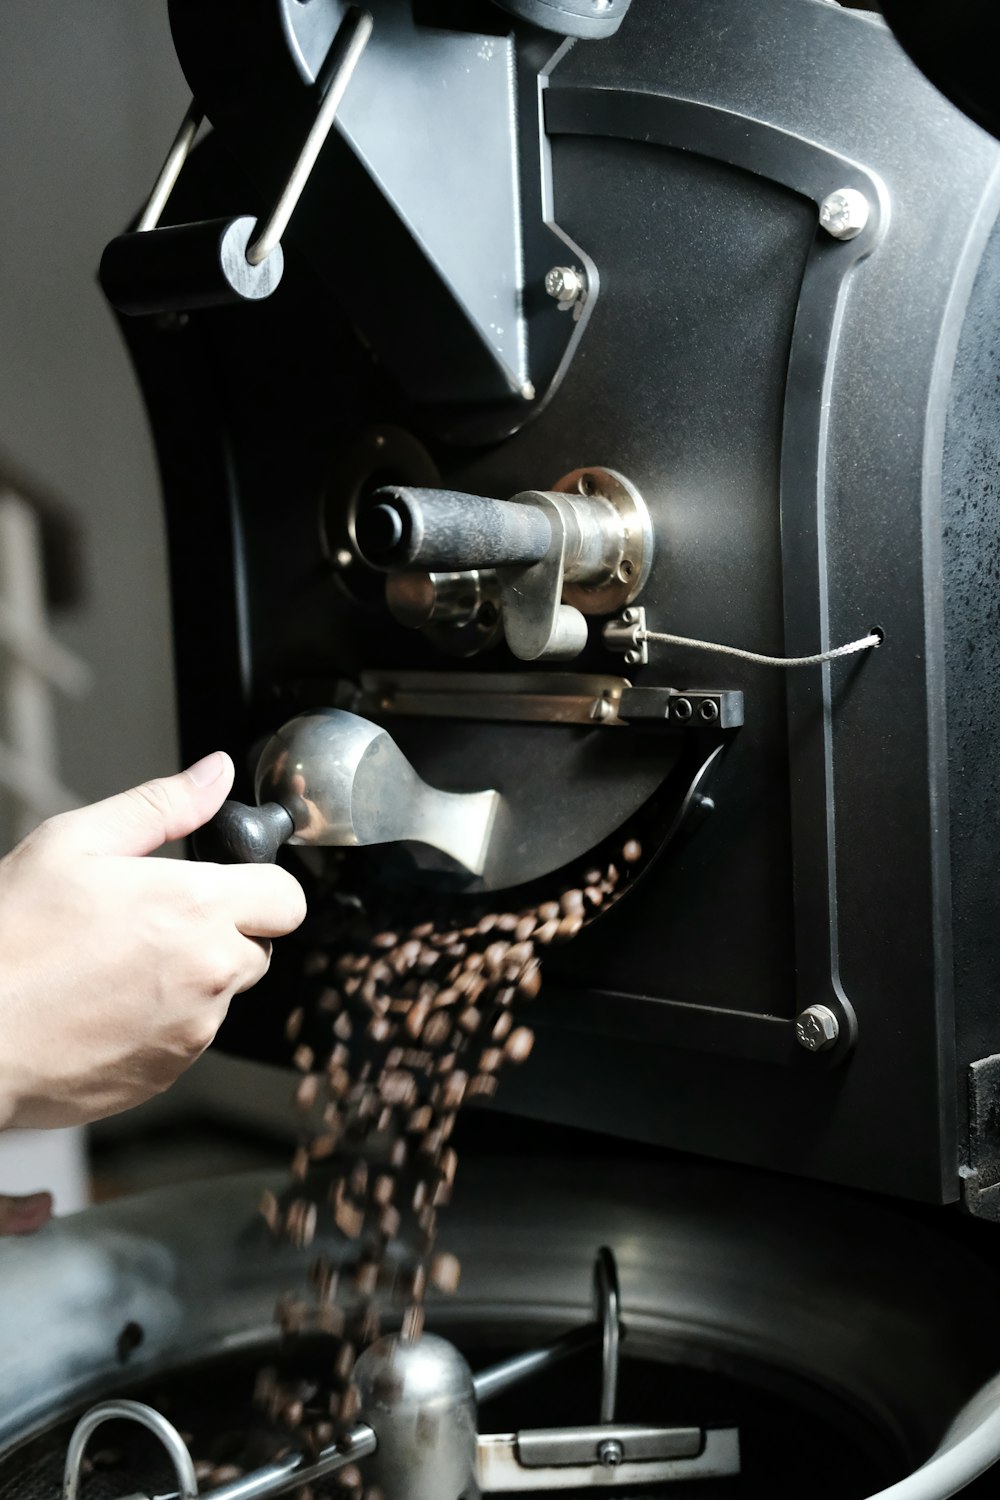 a person is pouring coffee into a machine